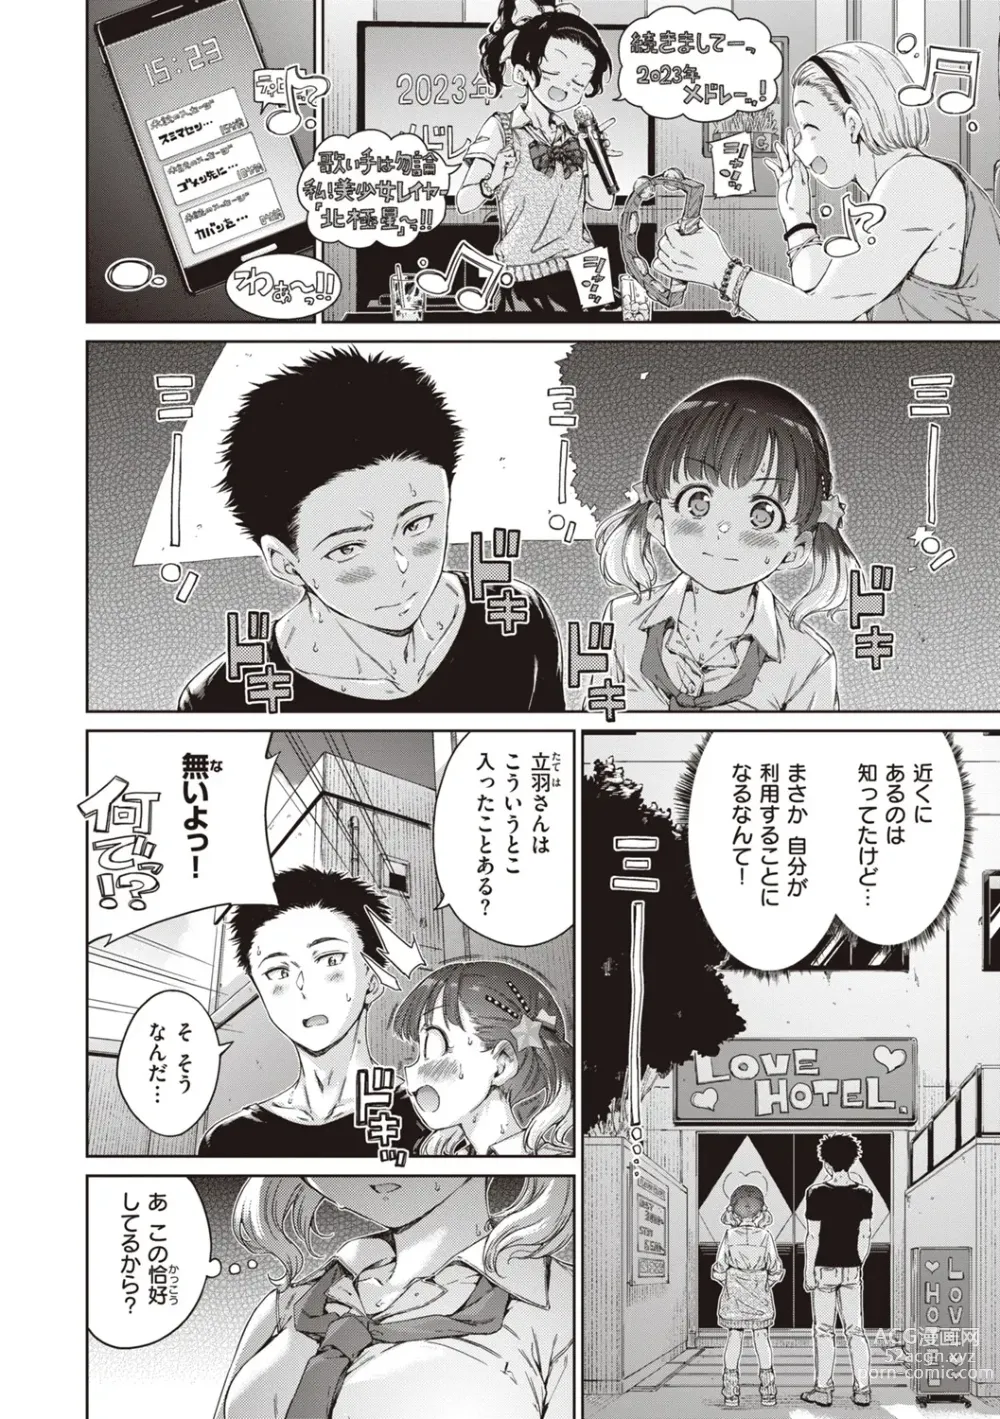 Page 12 of manga Wataame to Caramel - Cotton Candy and Caramel